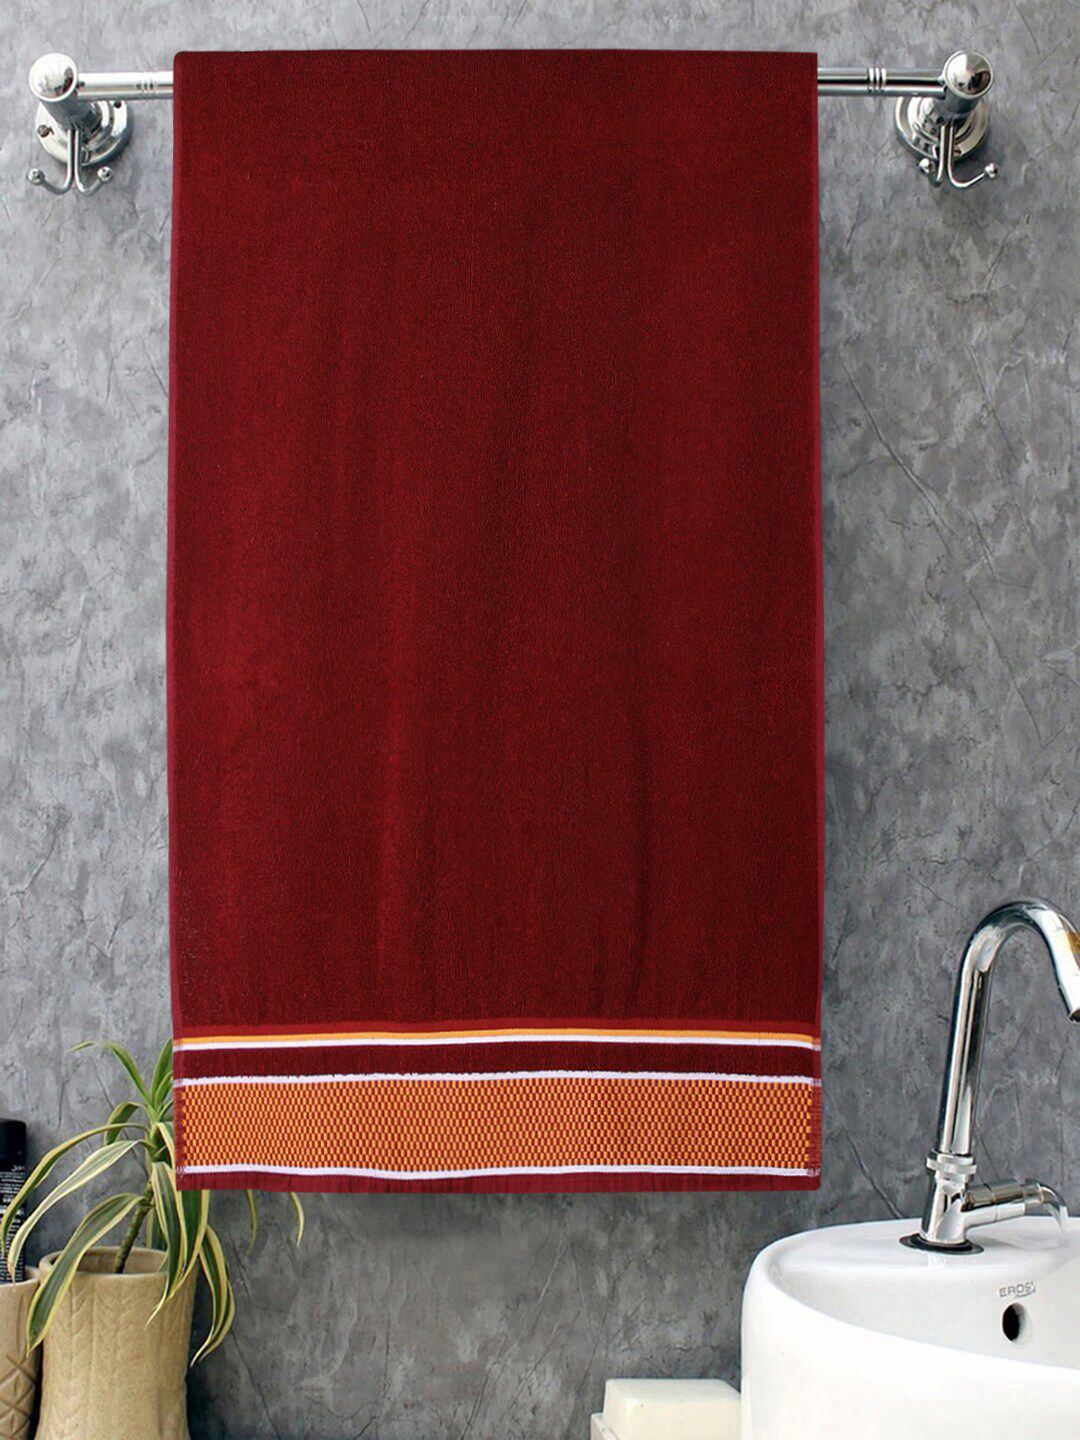 ROMEE Maroon Solid 500 GSM Cotton Bath Towel Price in India